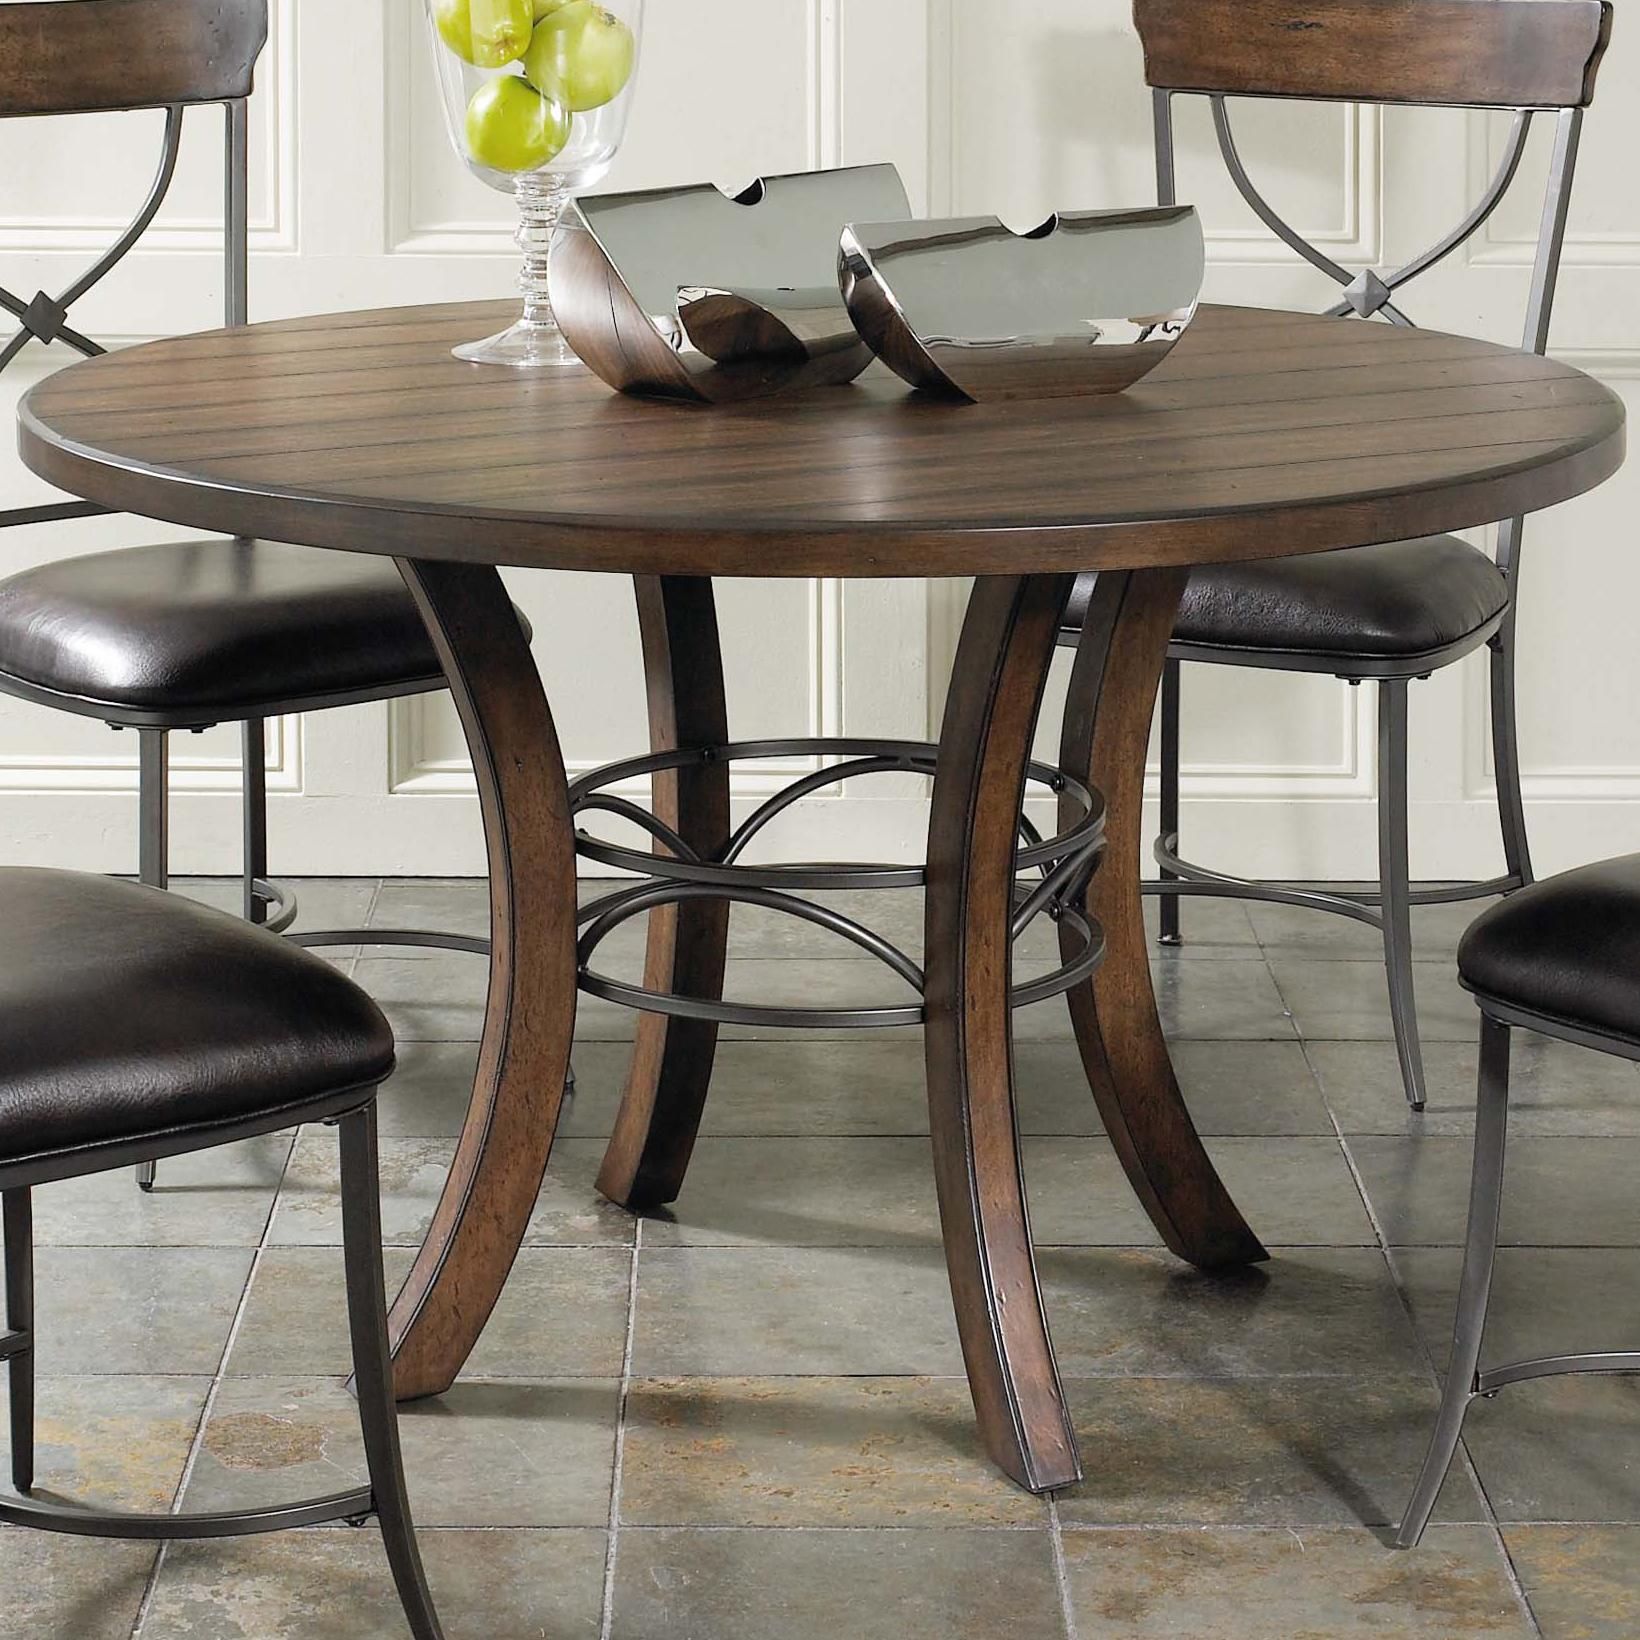 Round Wood Dining Table With Metal Acent Basehillsdale With Metal Legs And Oak Top Round Console Tables (View 10 of 20)